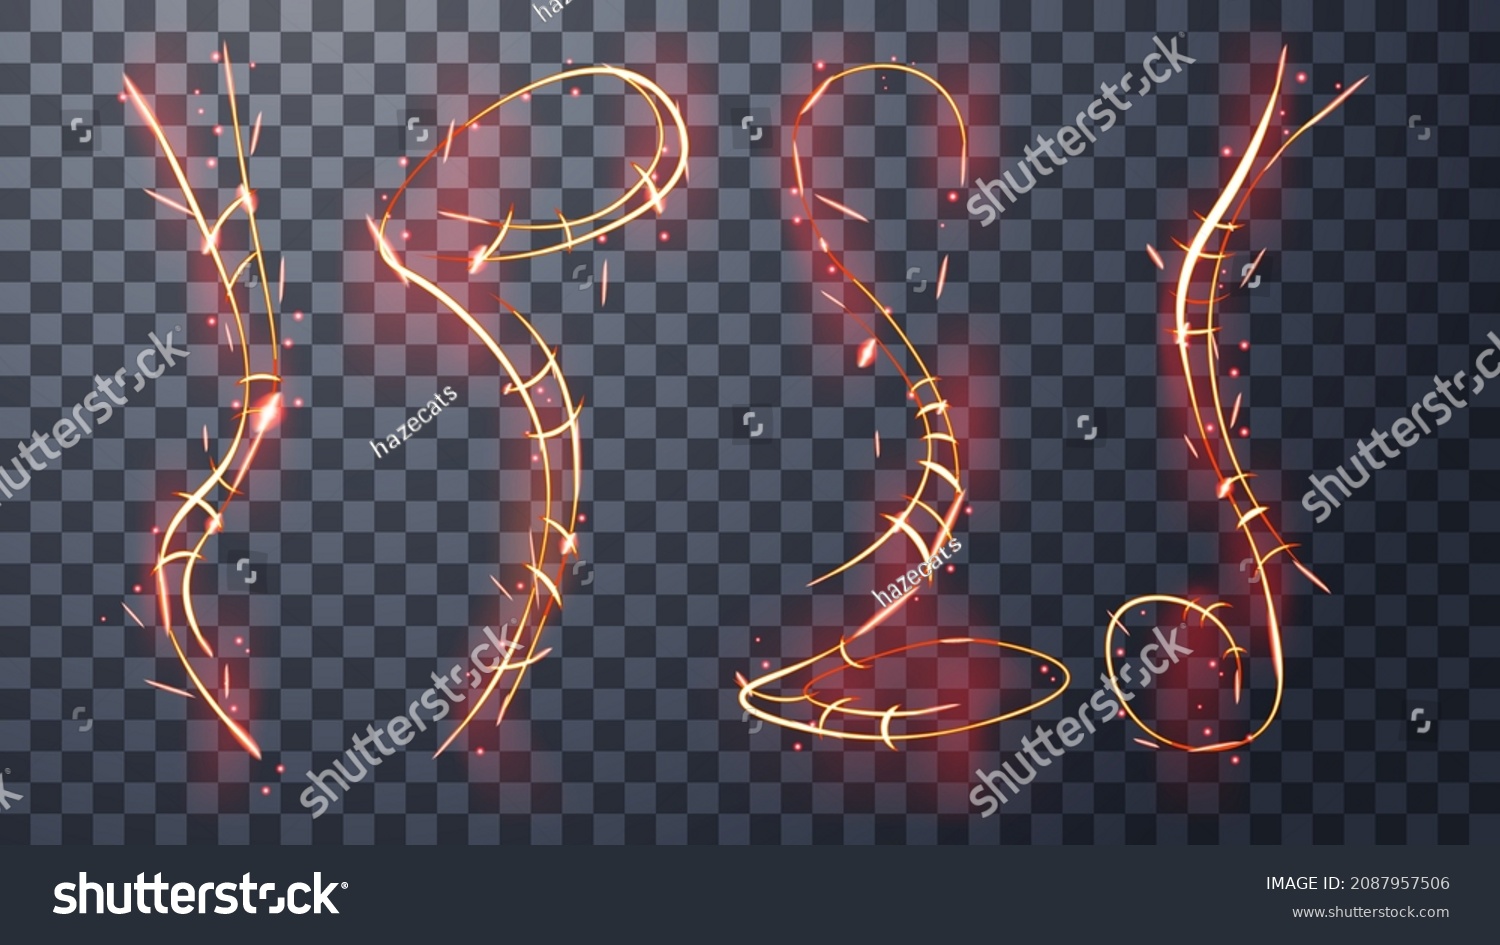 SVG of Modern magic witchcraft symbols. Ethereal fire line, threads and lasso with strange flame sparks. Decor elements for magic doctor, shaman, medium. Luminous trail effect on transparent background. svg